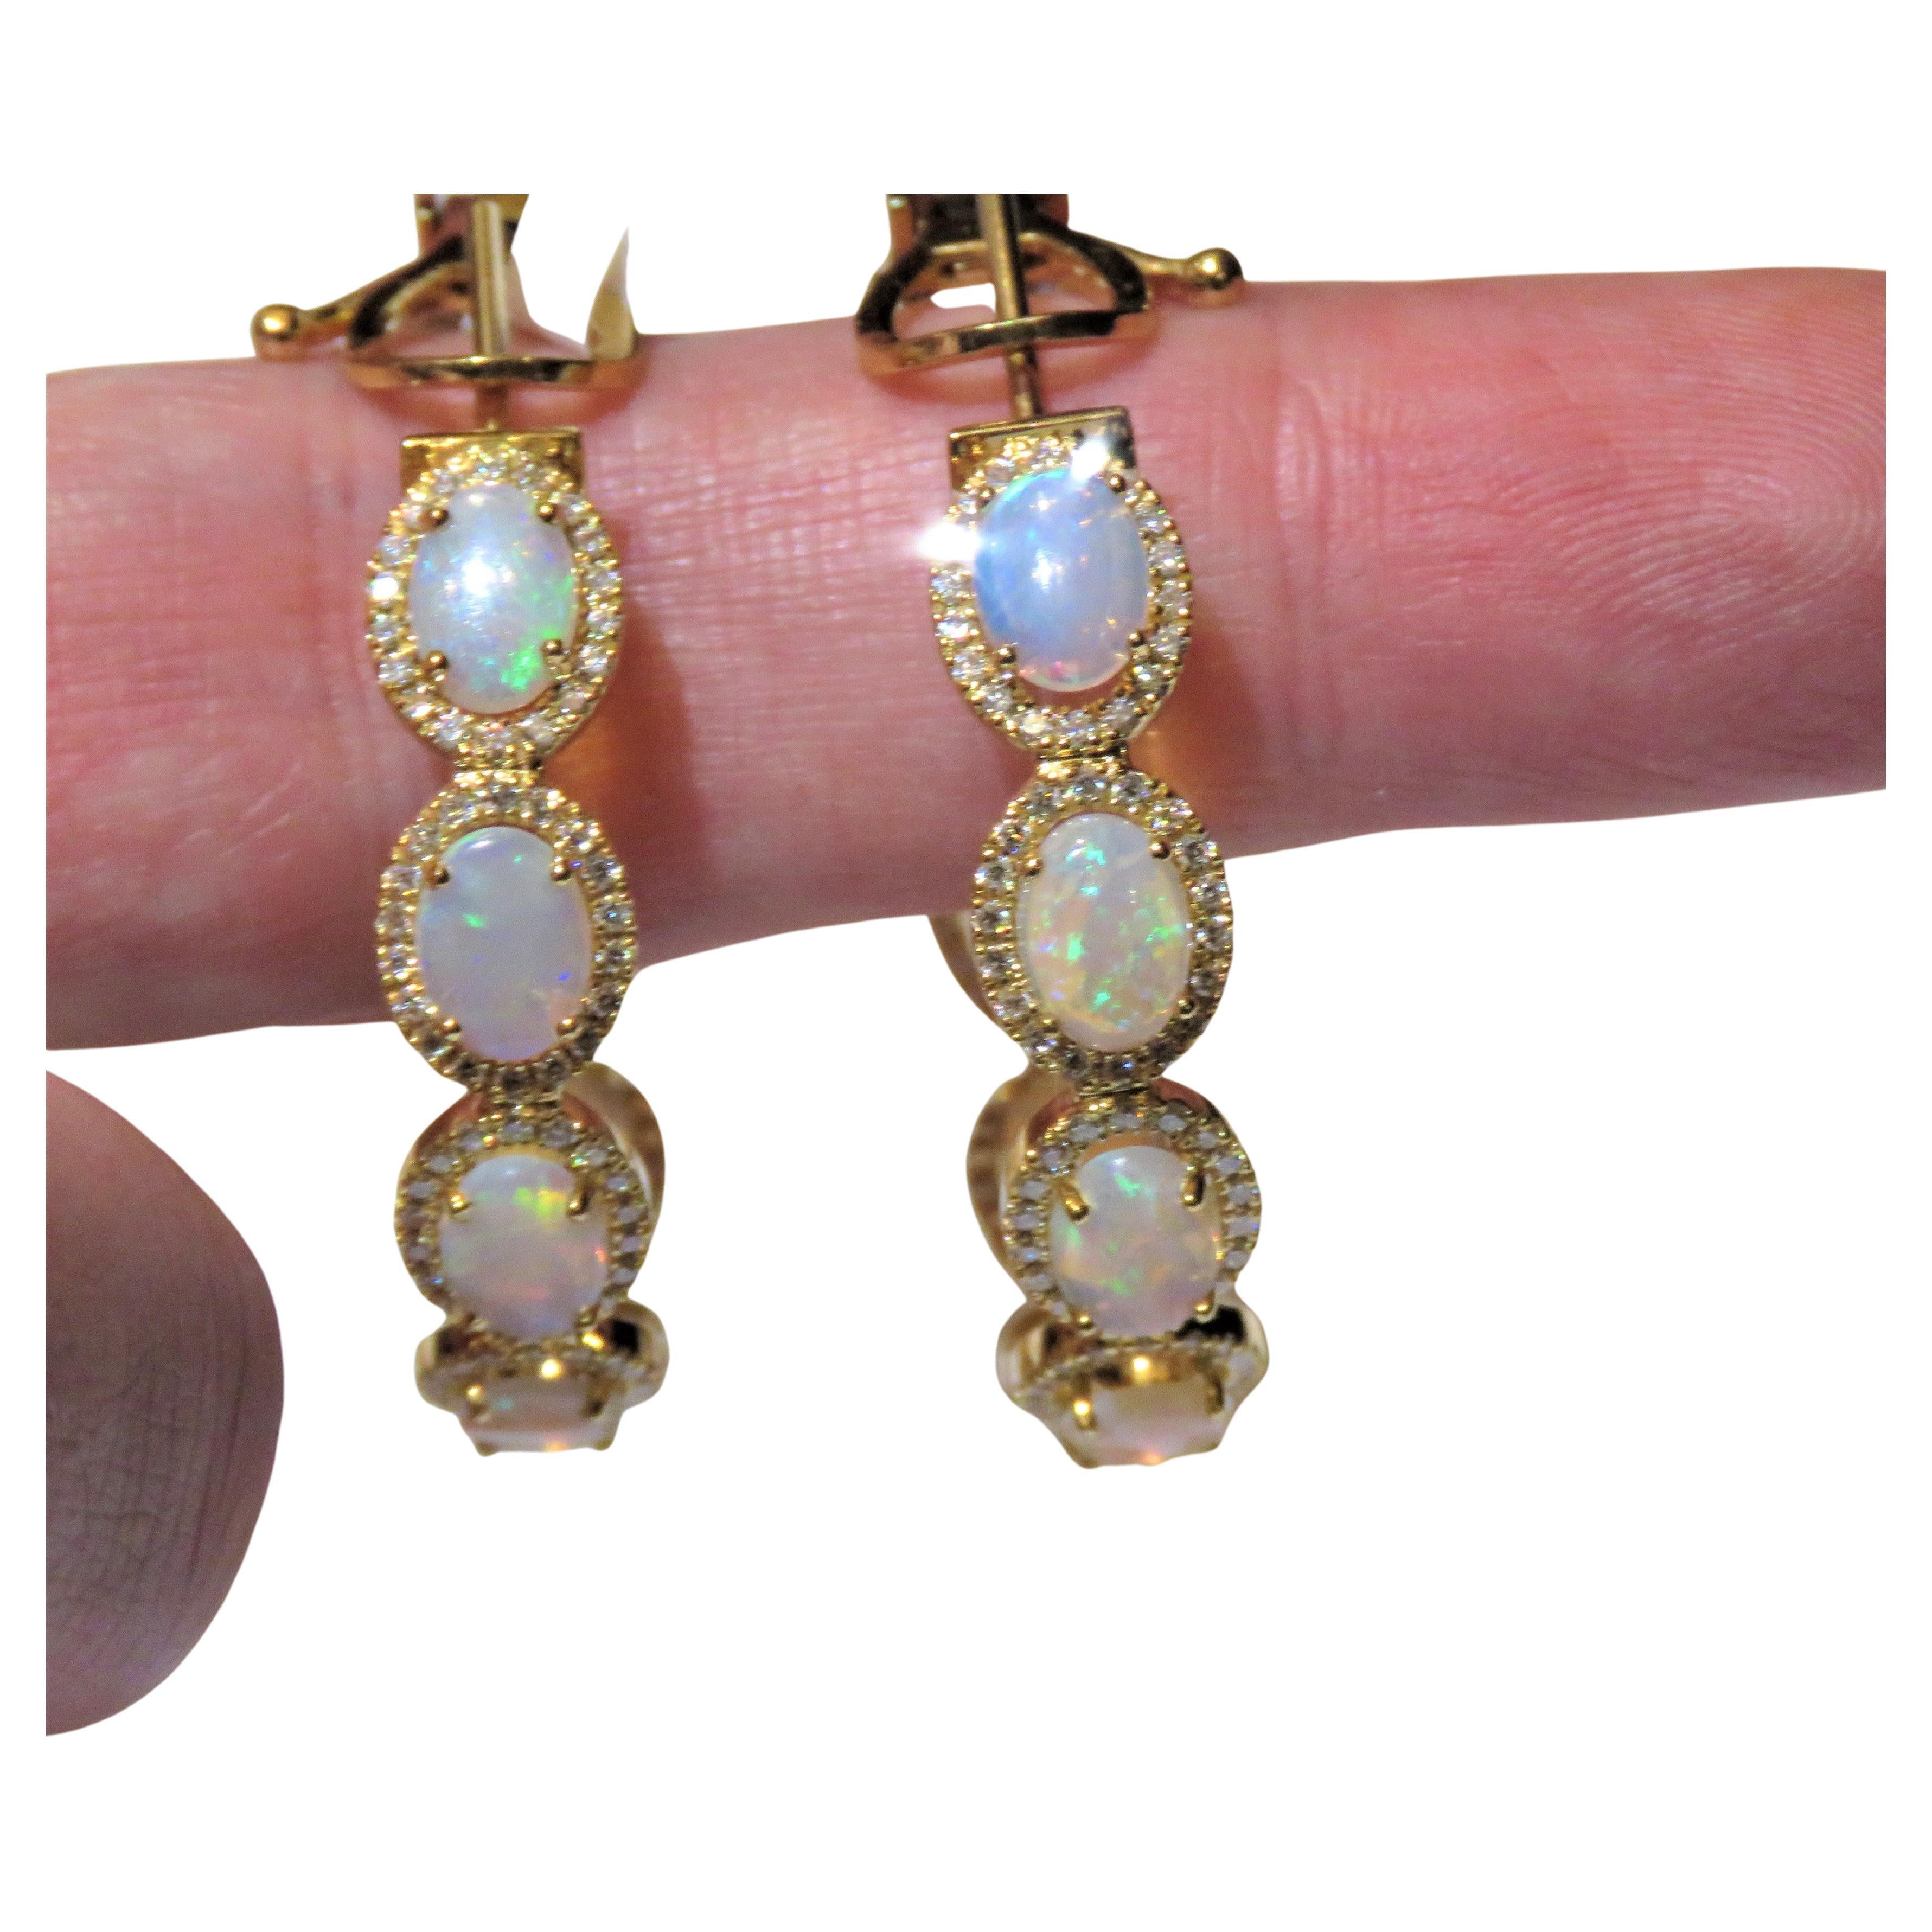 NWT $12, 500 Magnificent 18KT Gold Large 9CT Fancy Opal Diamond Hoop Earrings For Sale